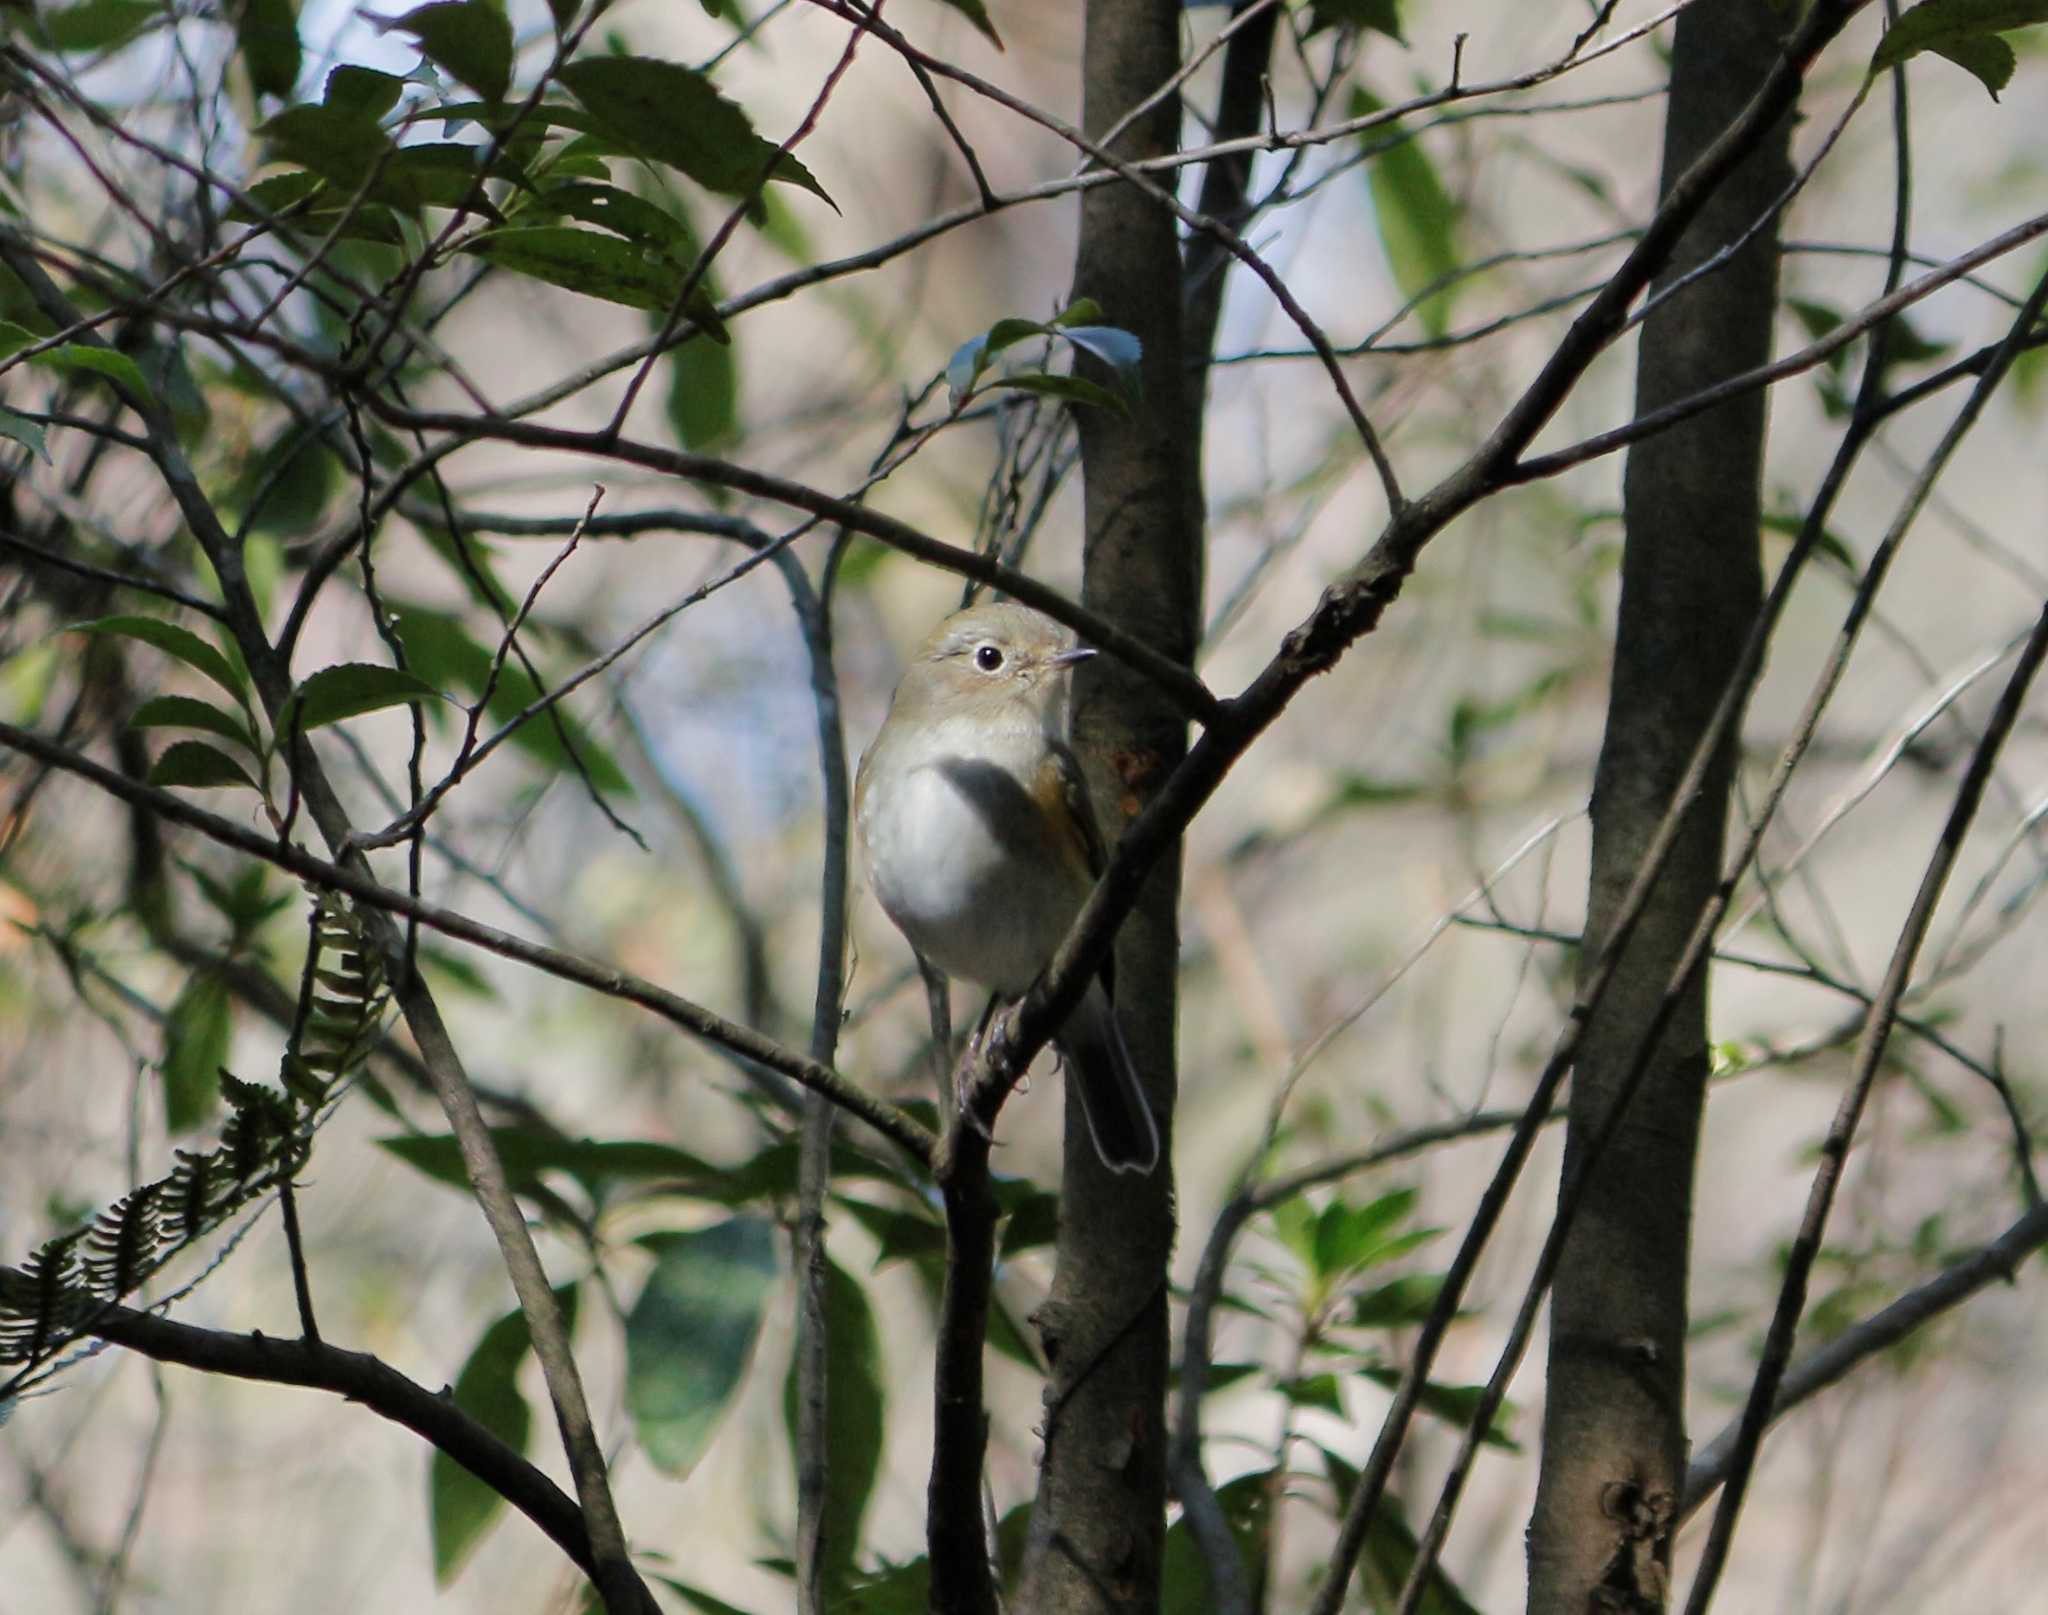 Photo of Narcissus Flycatcher at 天拝歴史自然公園 by momochan